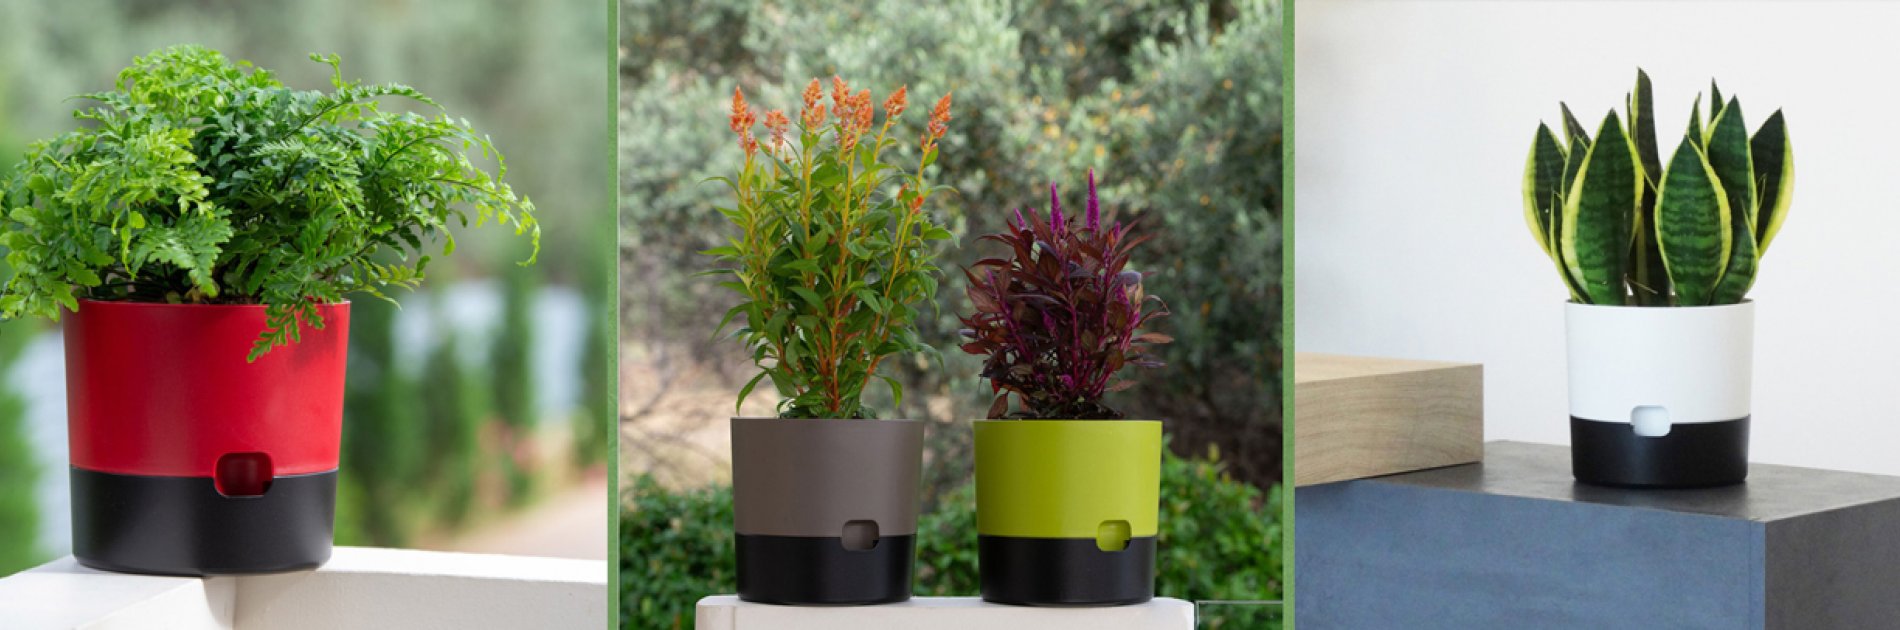 New colorful pots with self watering mechanism